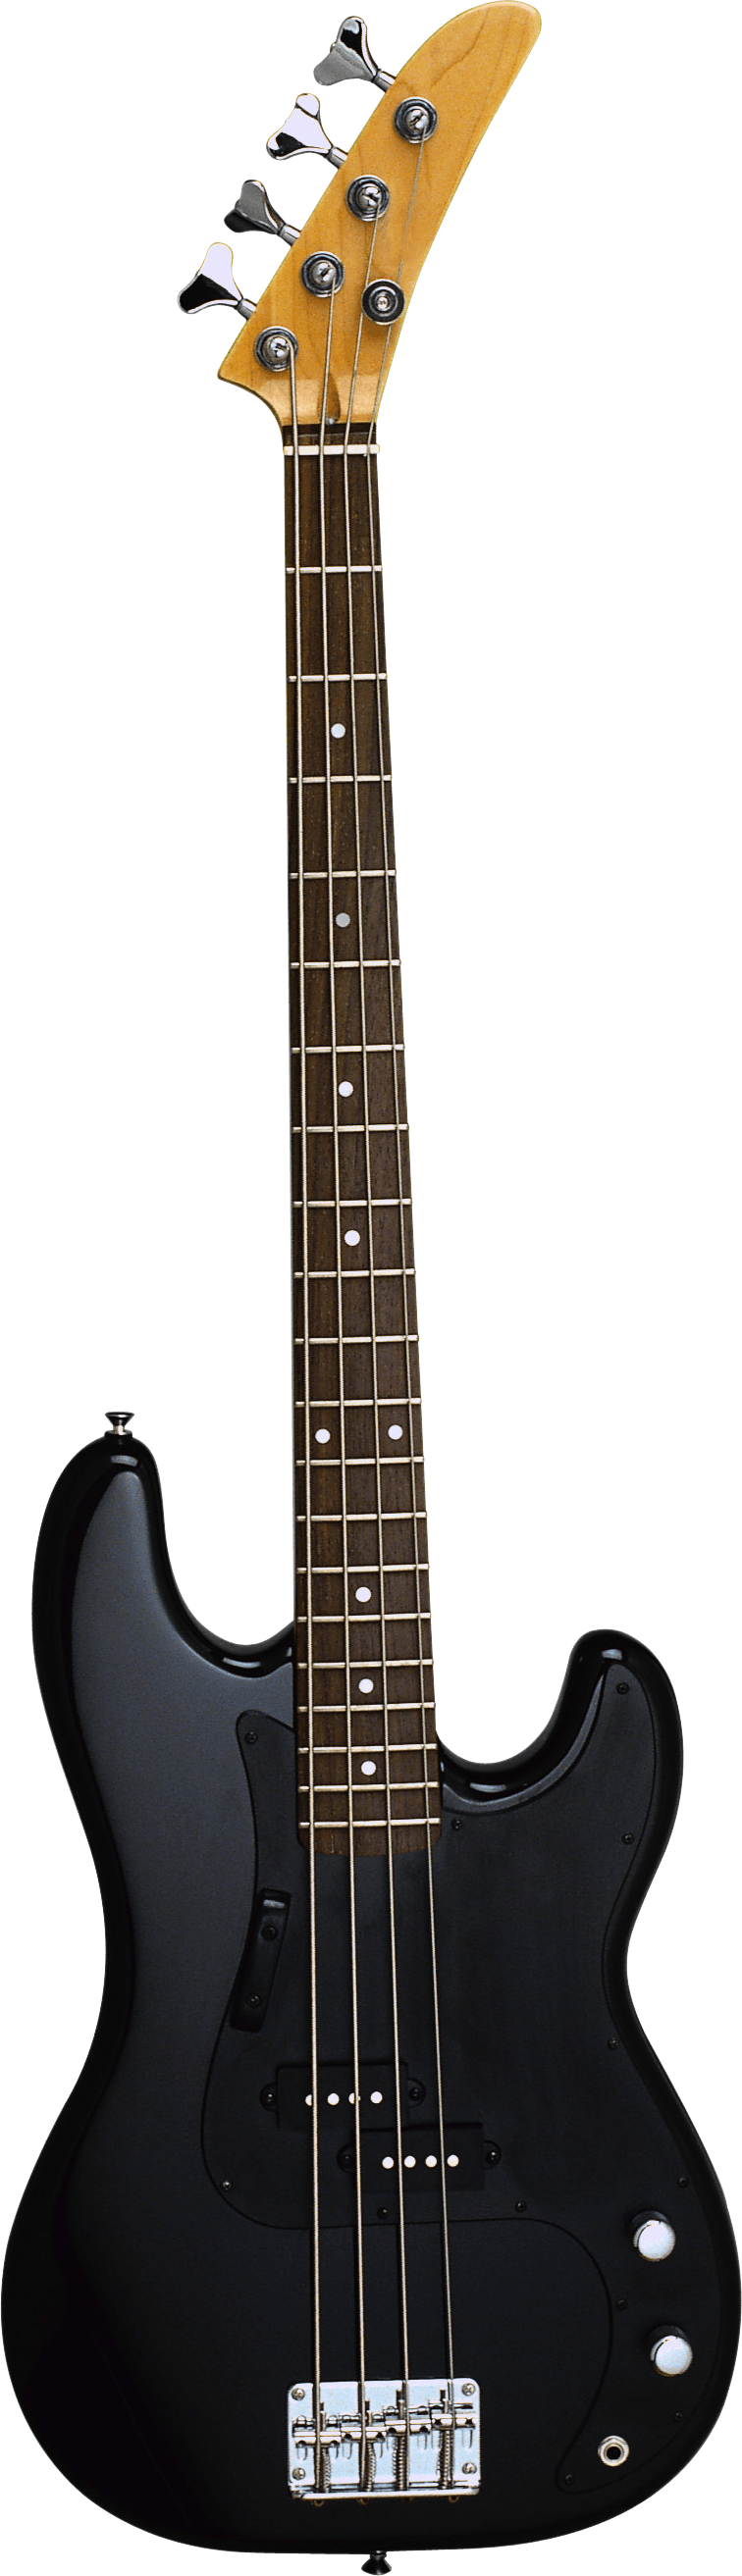 Guitar Black Electric Free Photo PNG Clipart